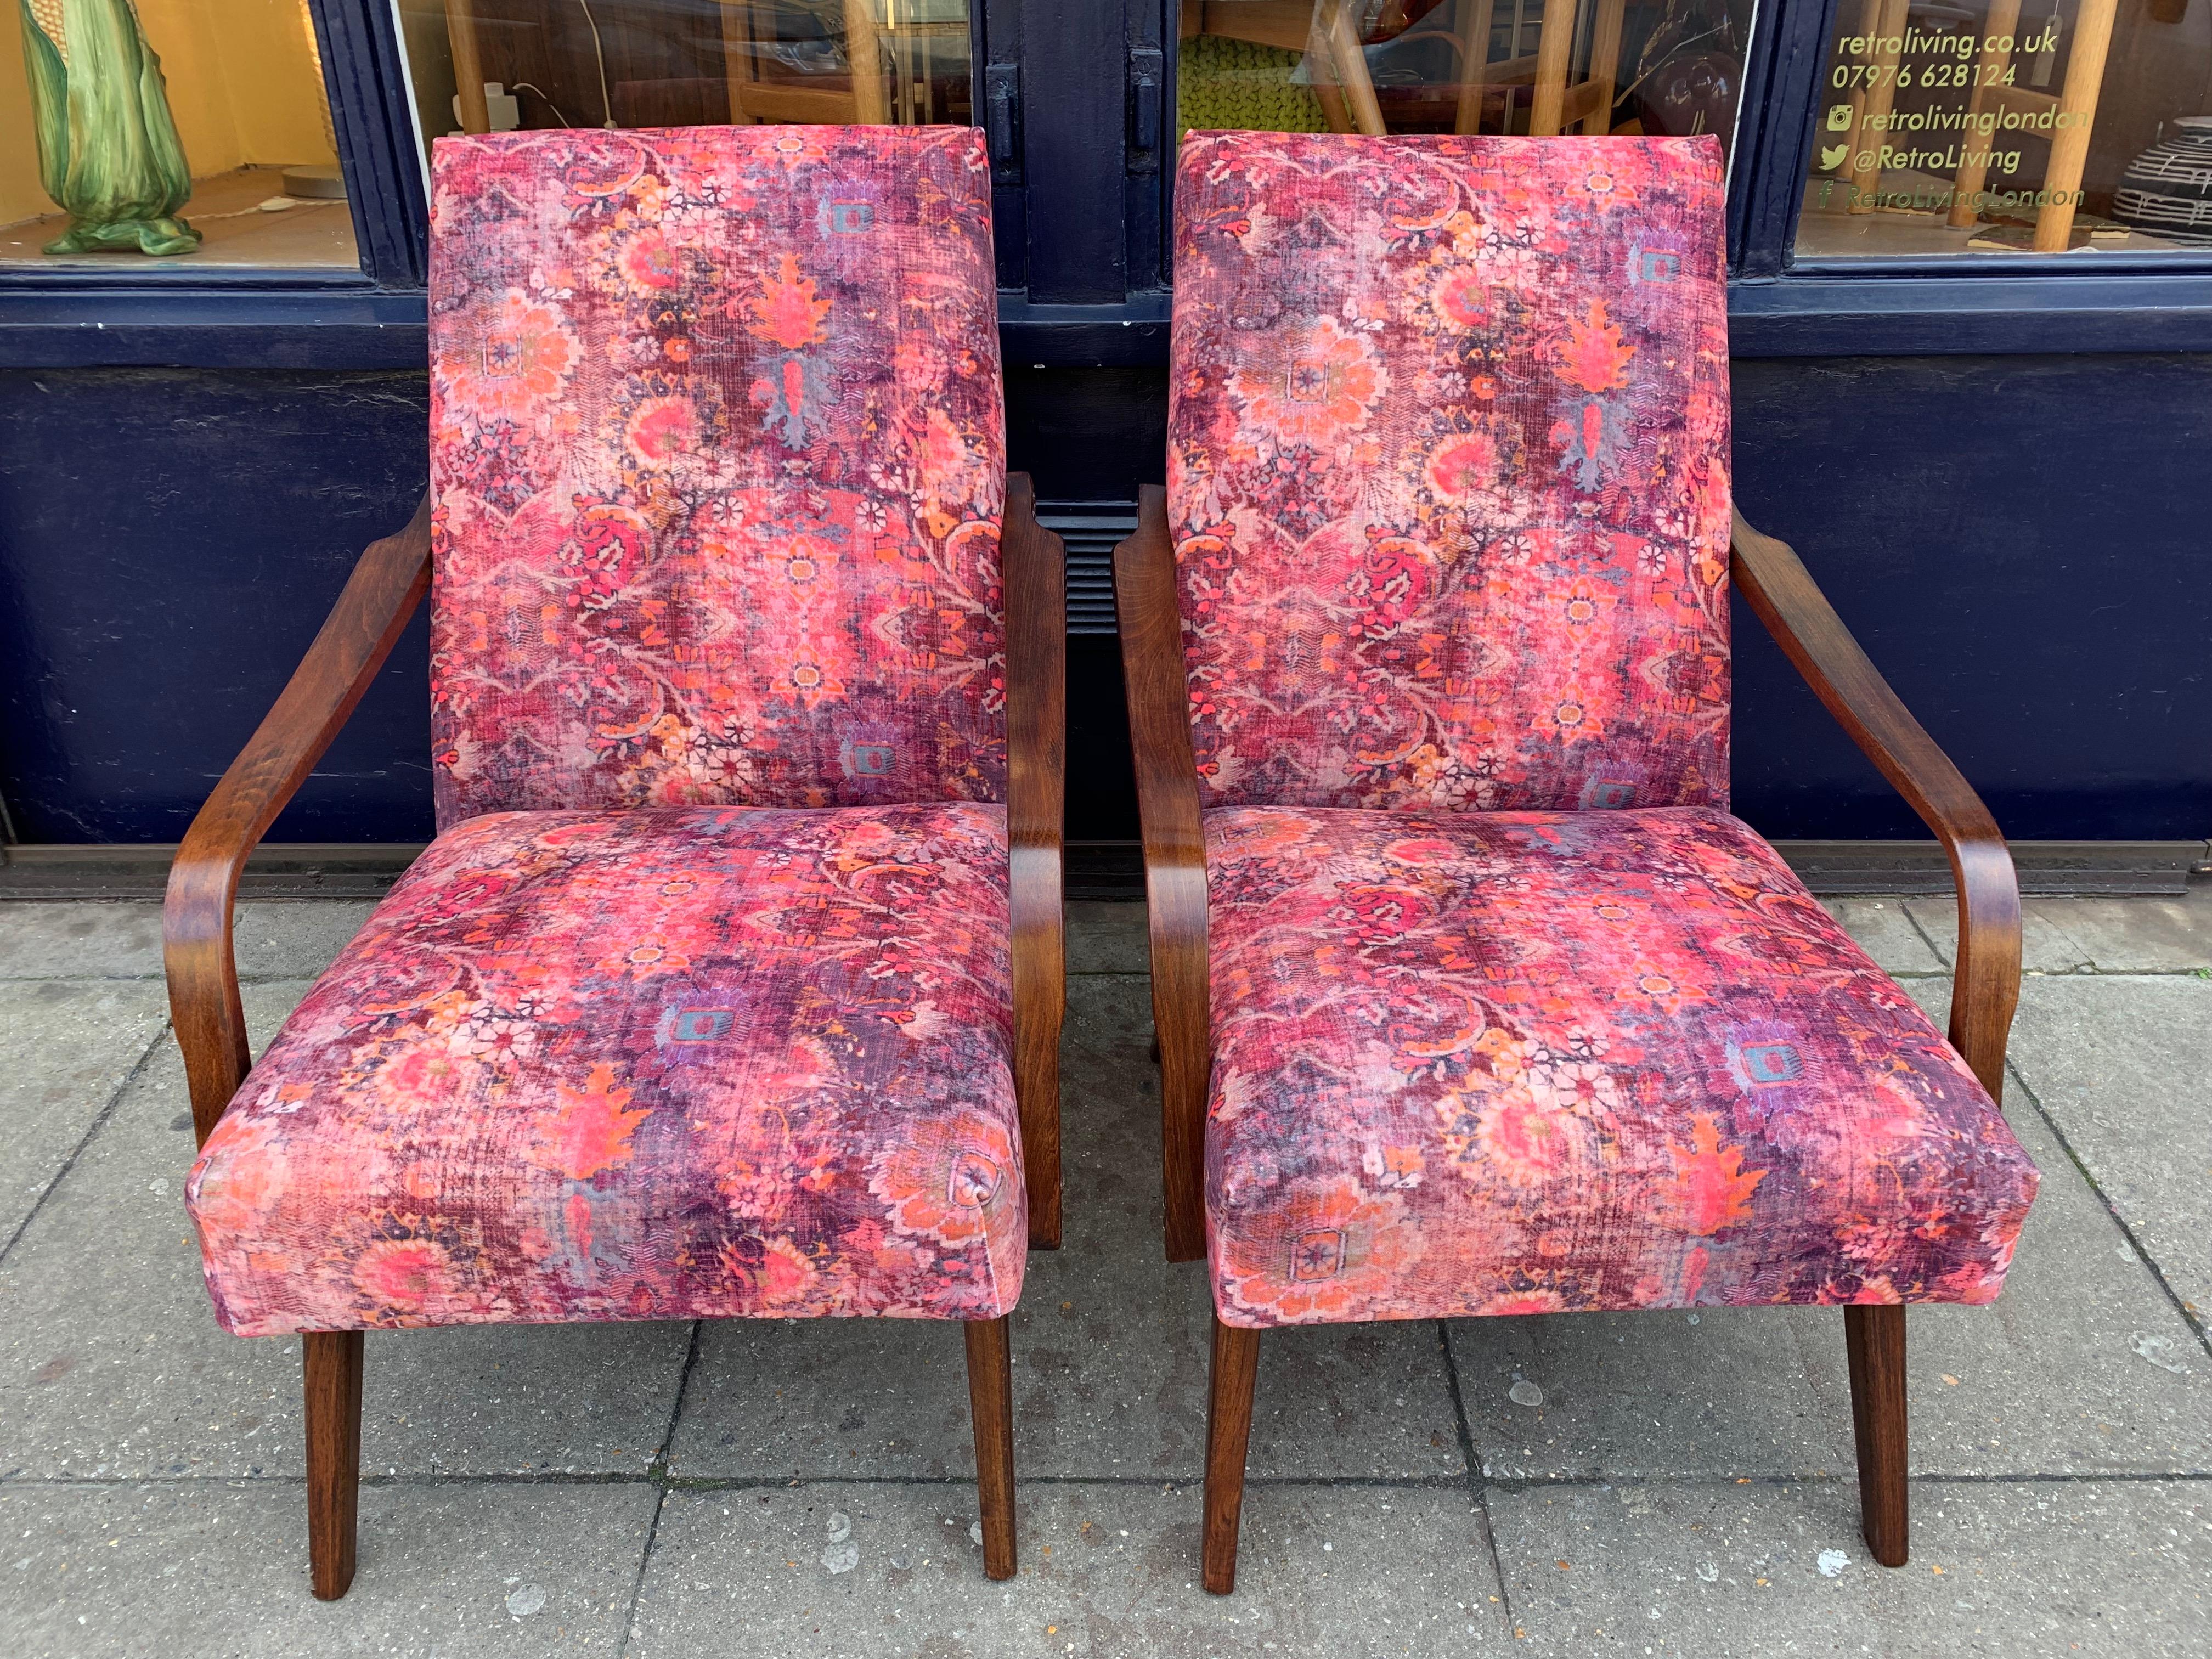 1960s pair of Czech armchairs. The frames are in a dark stained beech which contrasts beautifully with the contrasting and similar colors in the fabric. The chairs have been fully restored, refinished, polished and reupholstered in Linwood